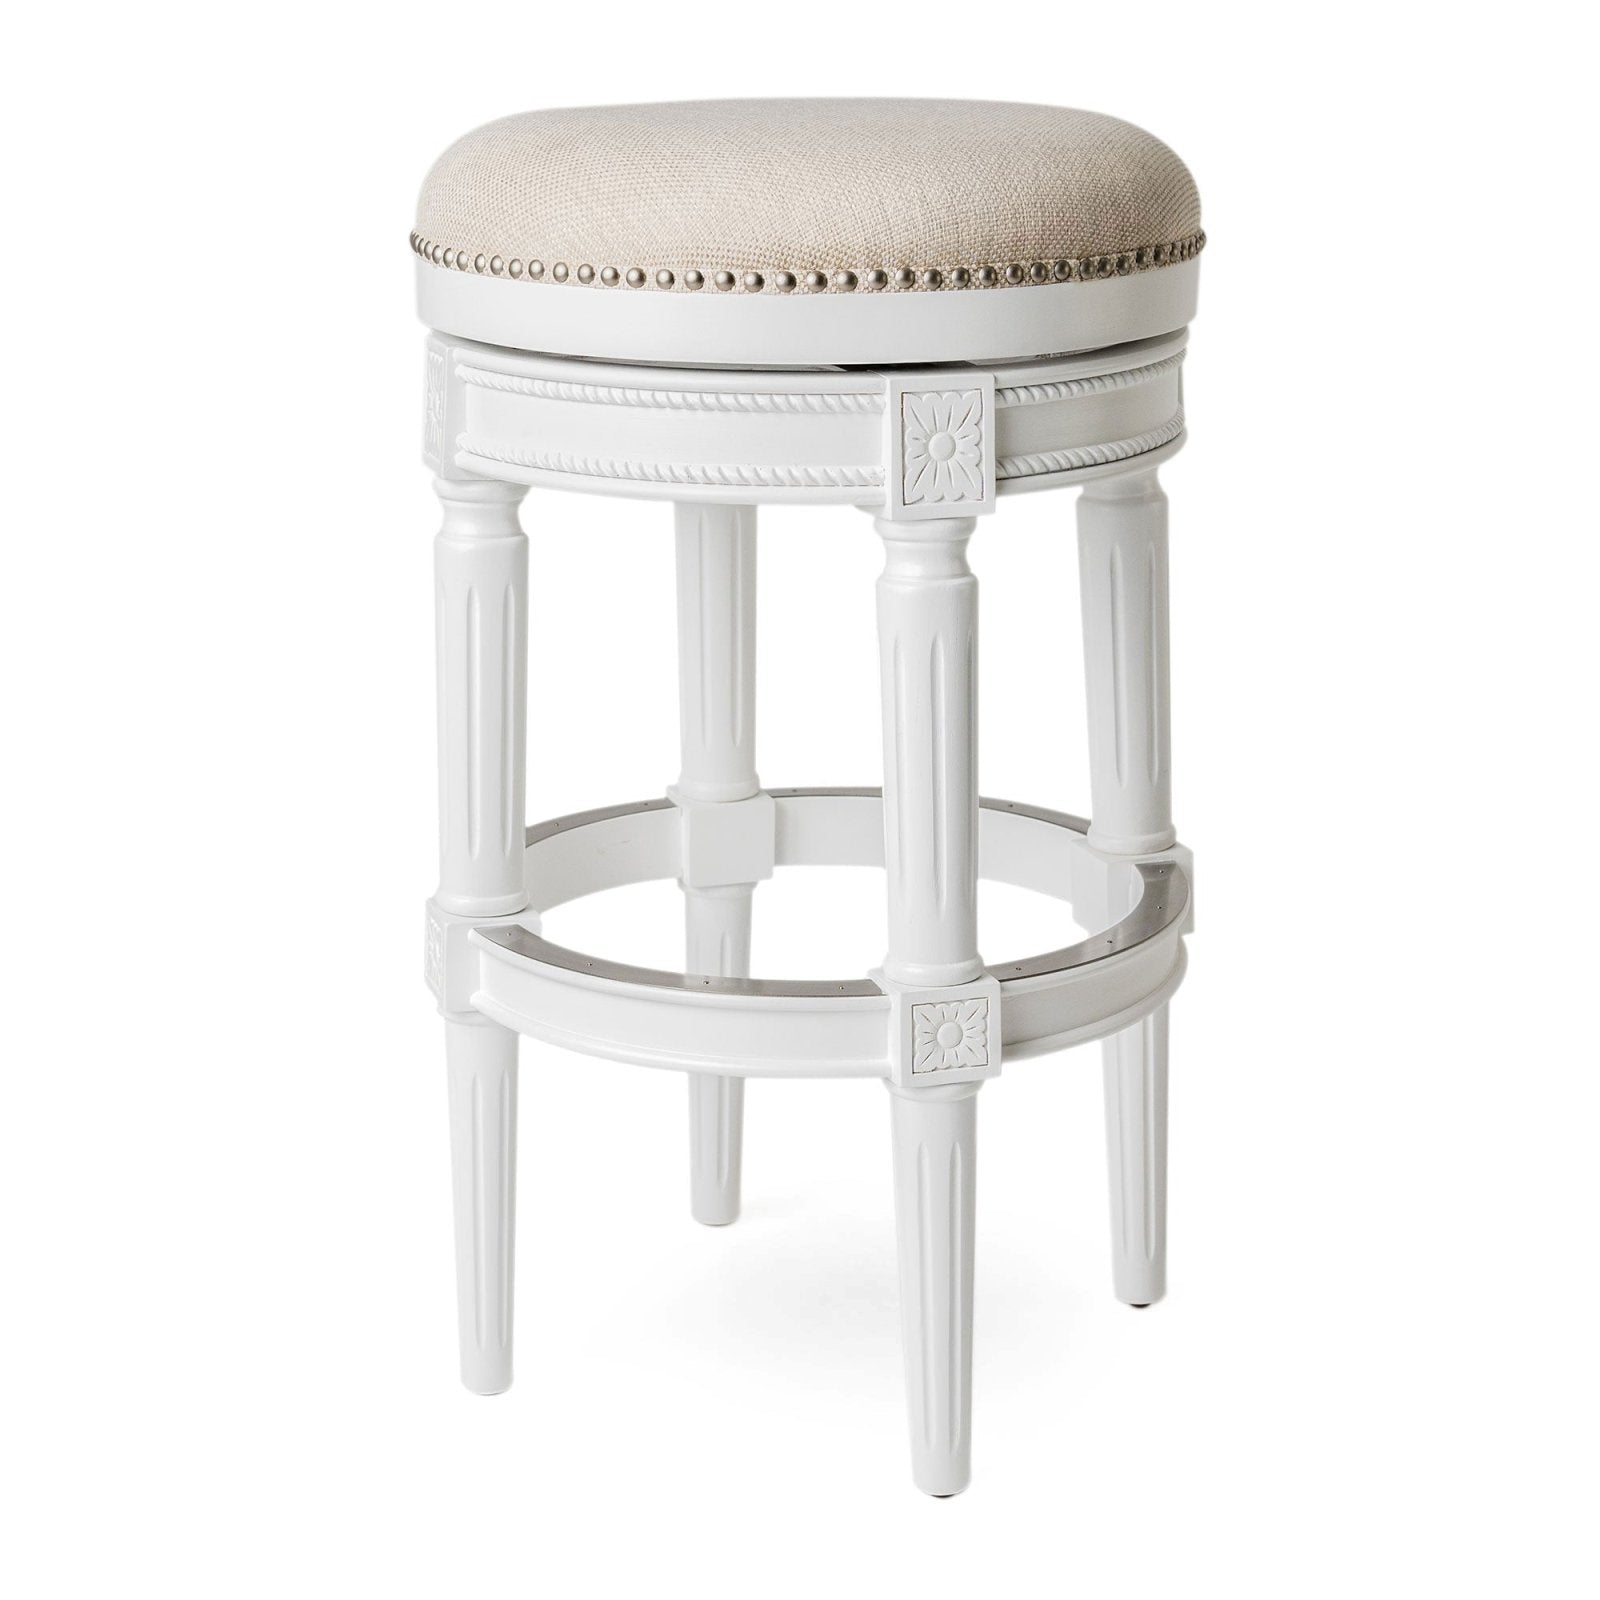 Pullman Backless Bar Stool in Alabaster White Finish with Cream Fabric Upholstery in Stools by Maven Lane